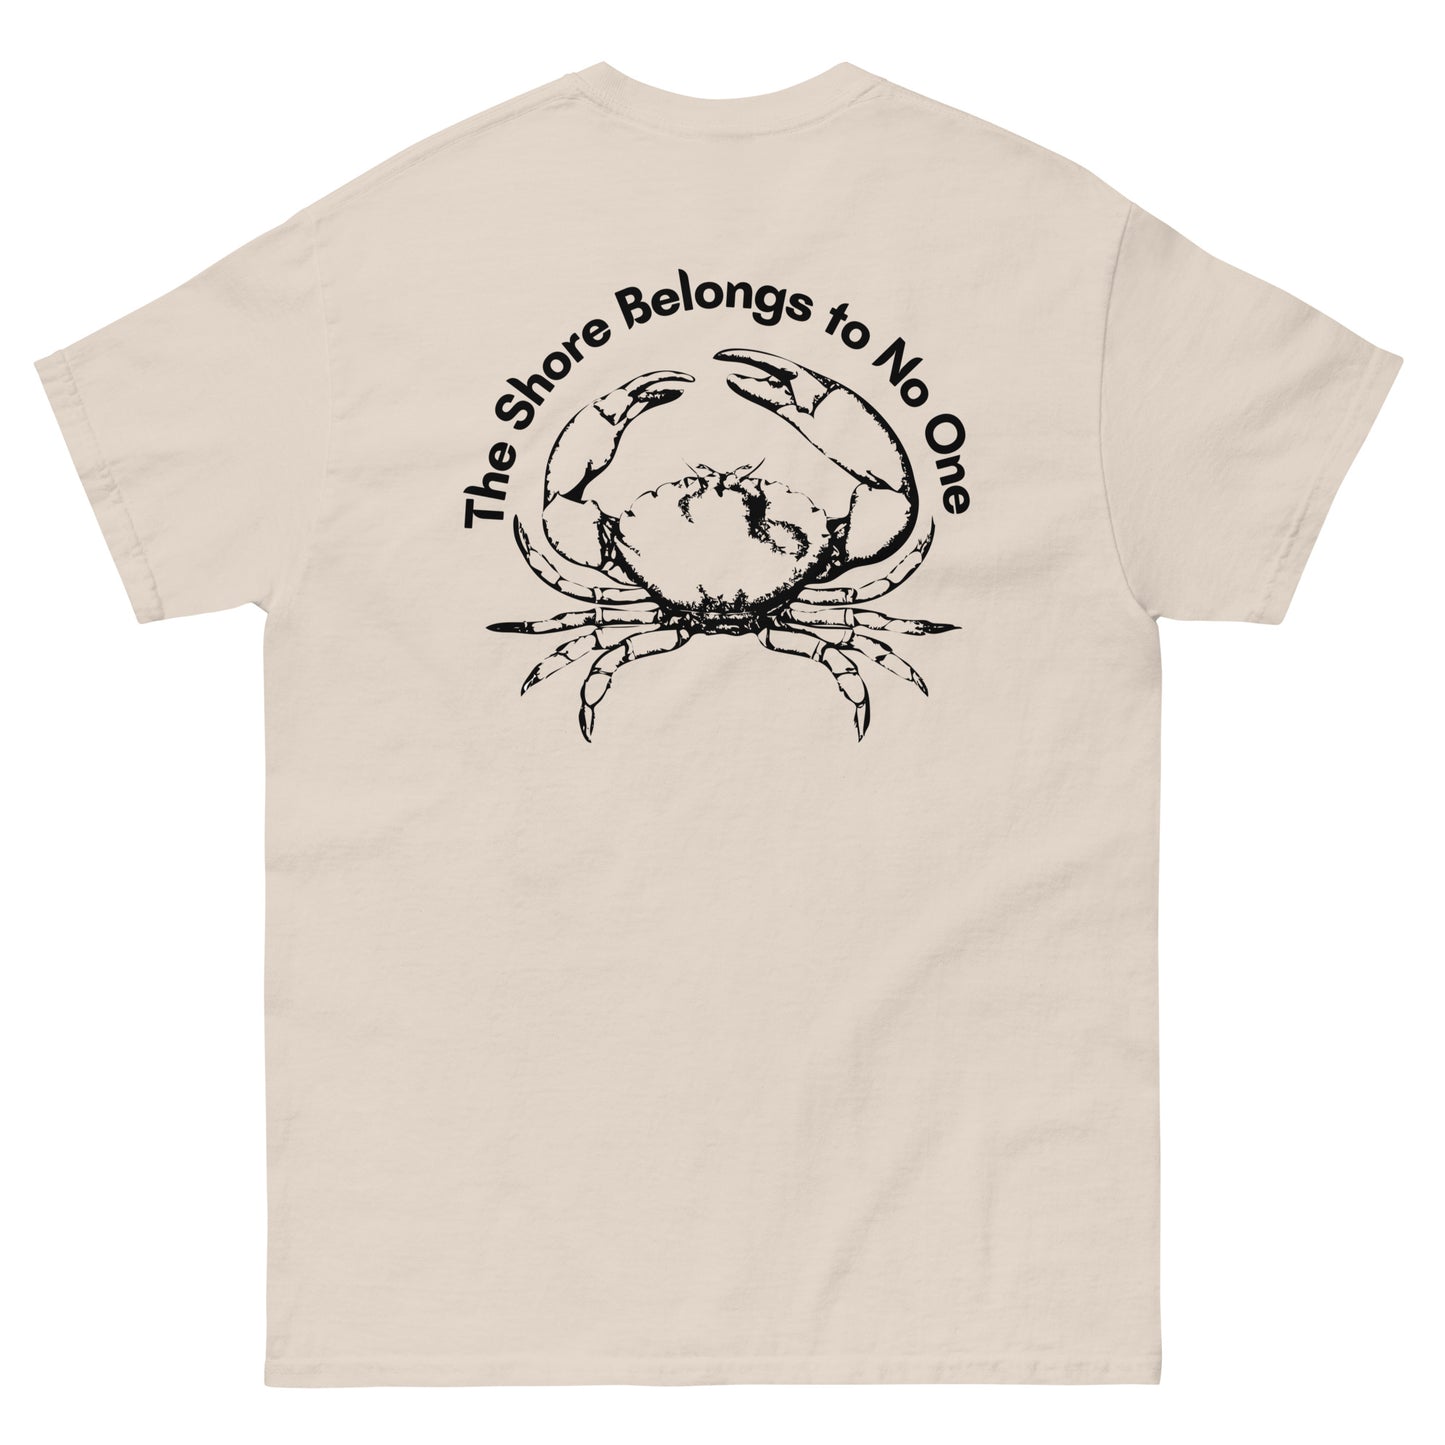 ' The Shore Belongs to No One' Graphic T Shirt